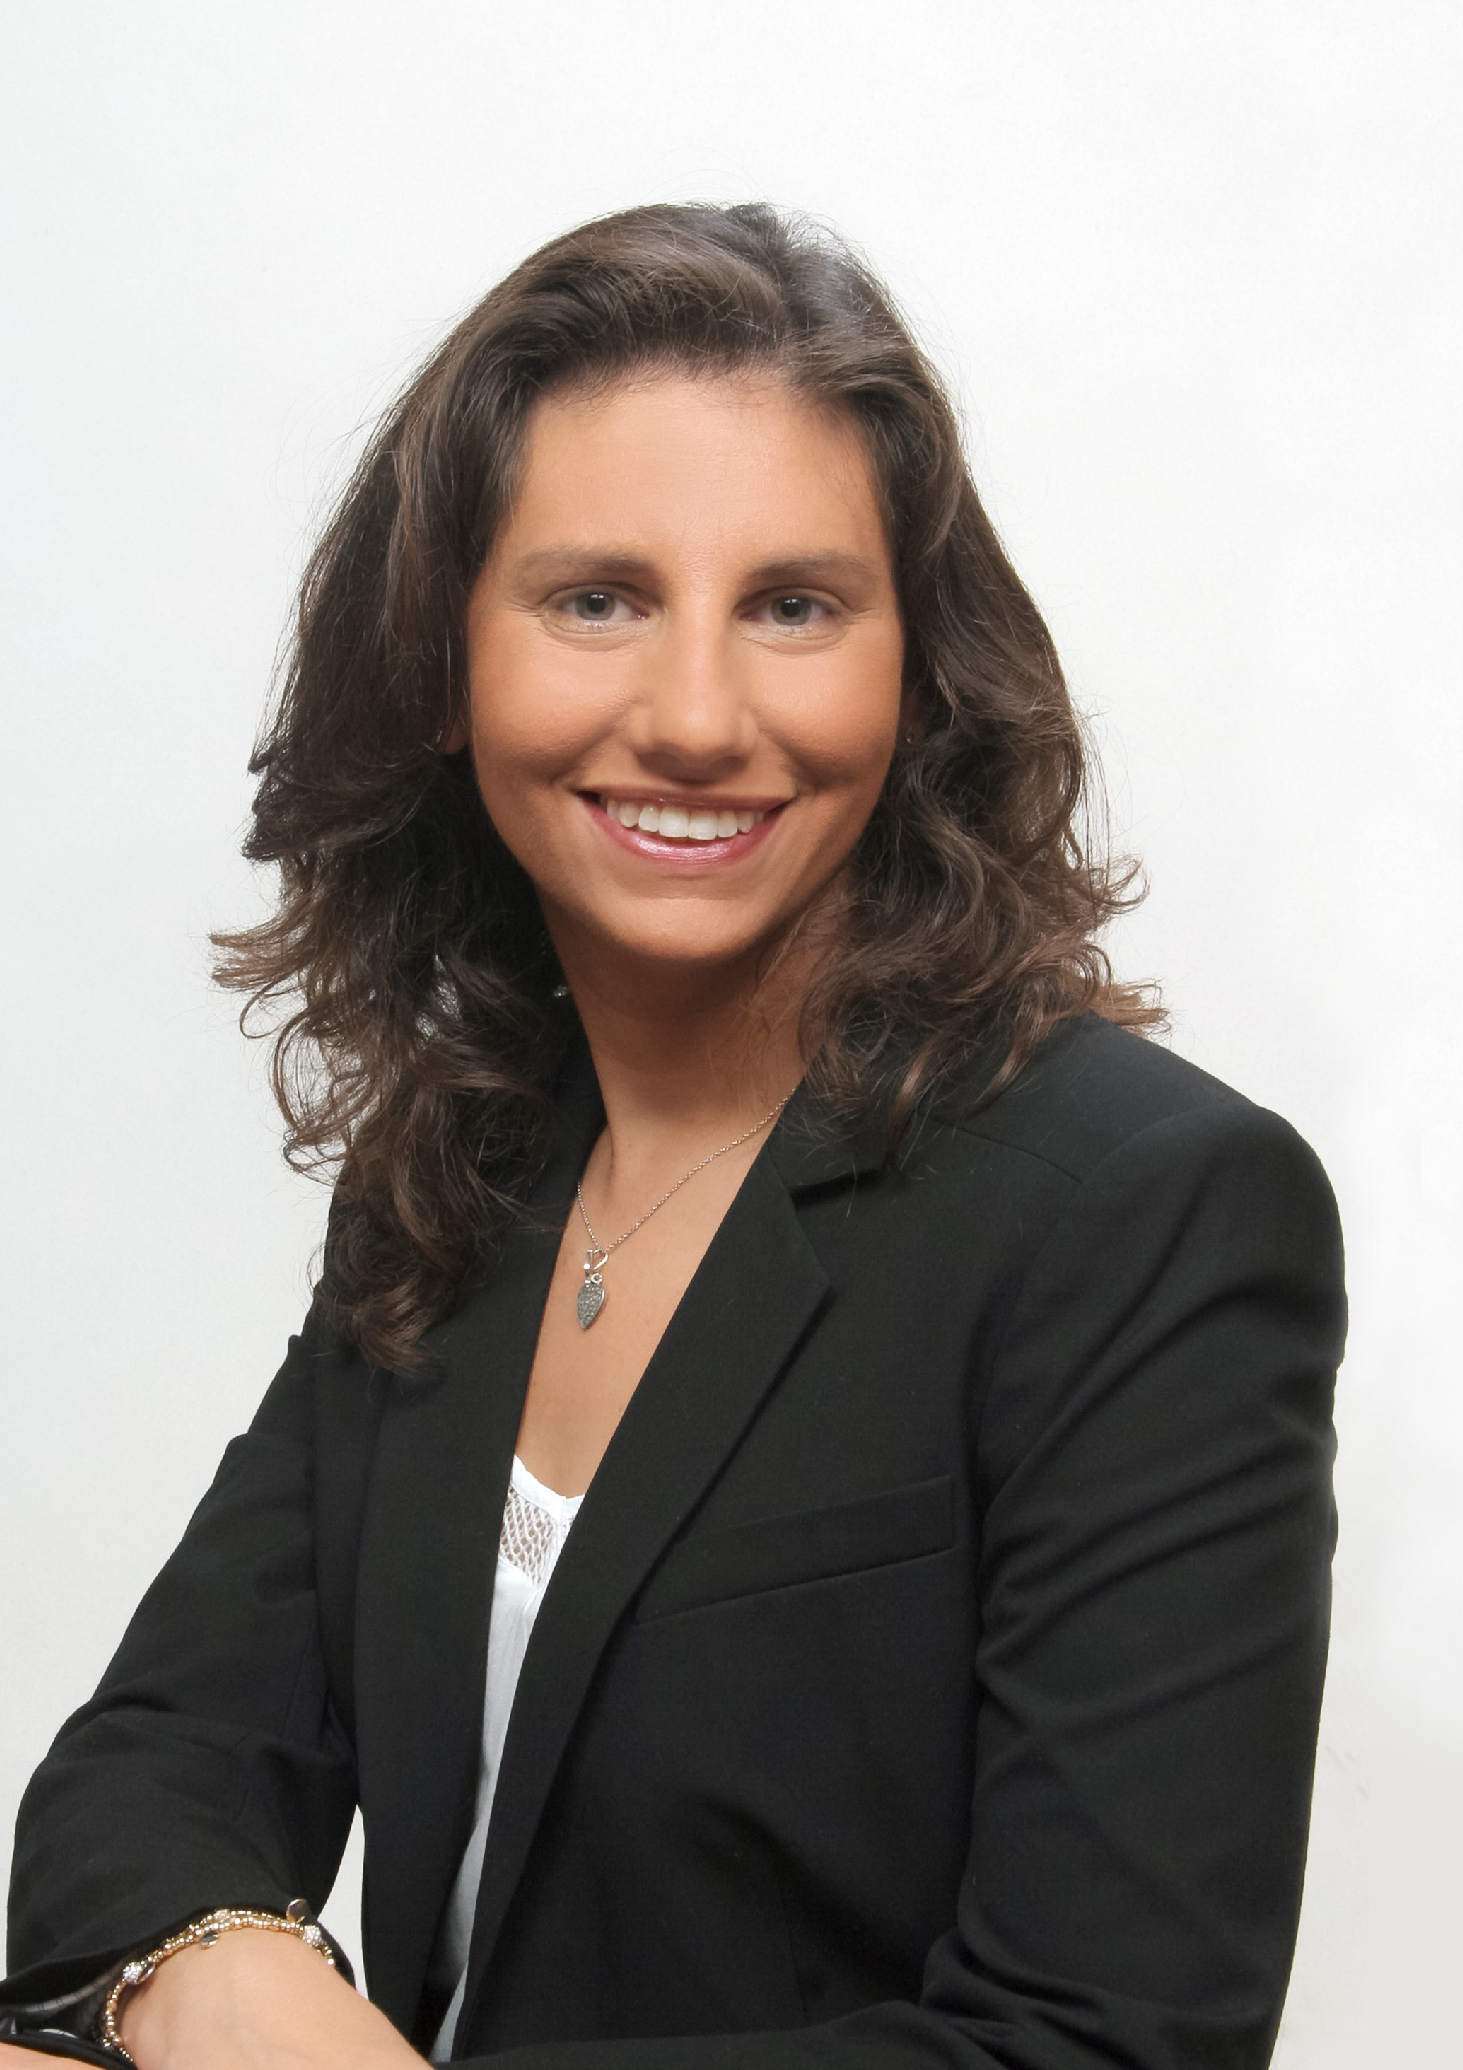 Galit Horovitz is co-founder at Welltech1 and has extensive experience in business development and international M&A.